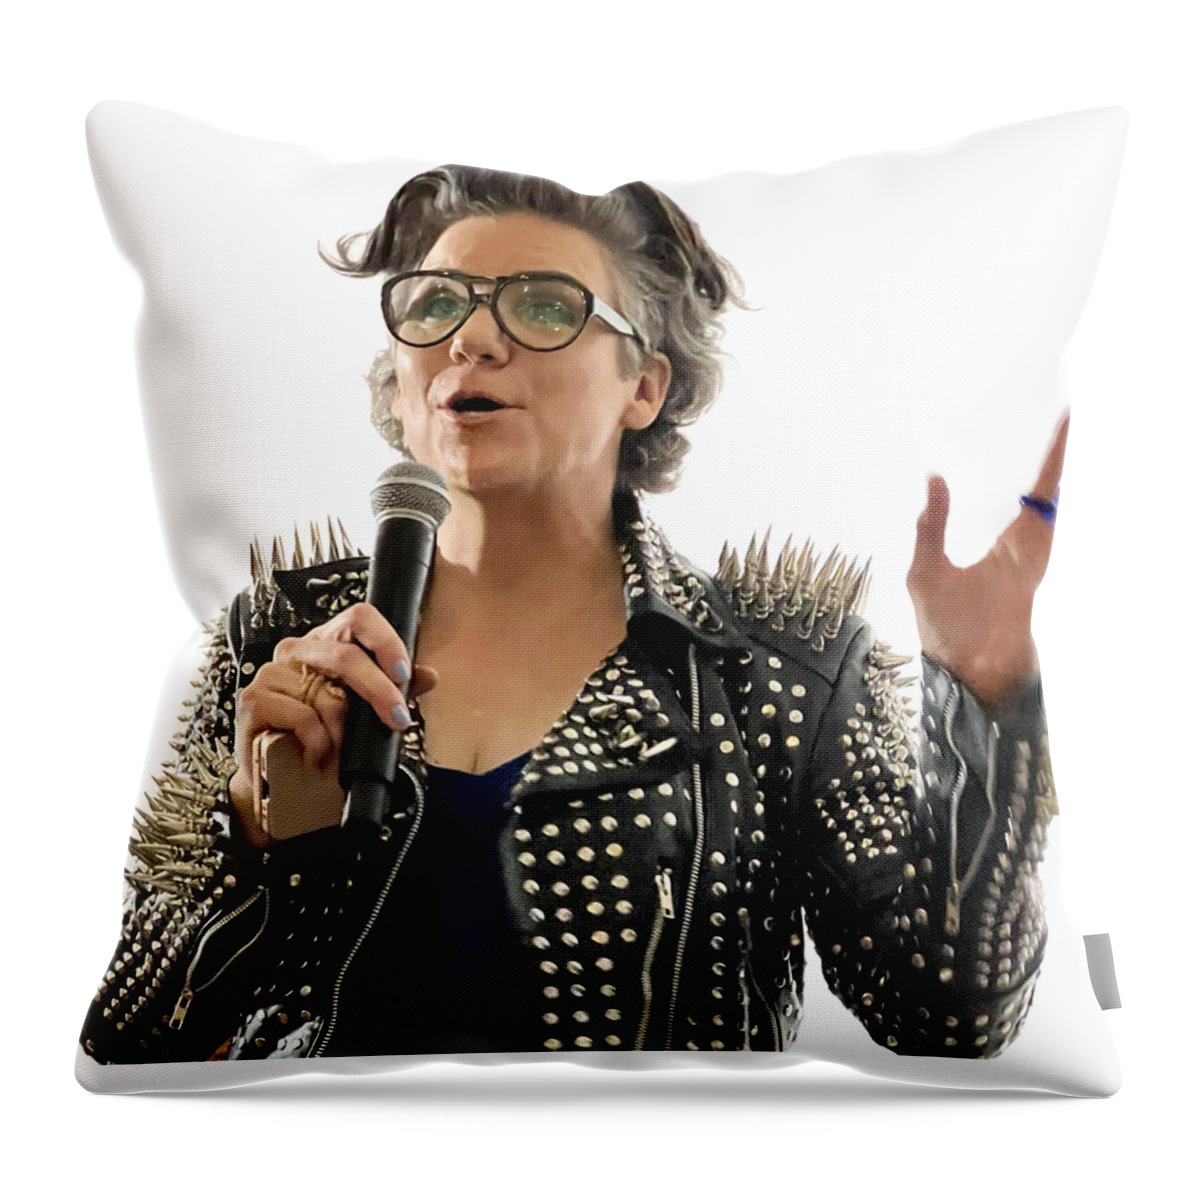 Talk Throw Pillow featuring the photograph Stef105 by John Manno